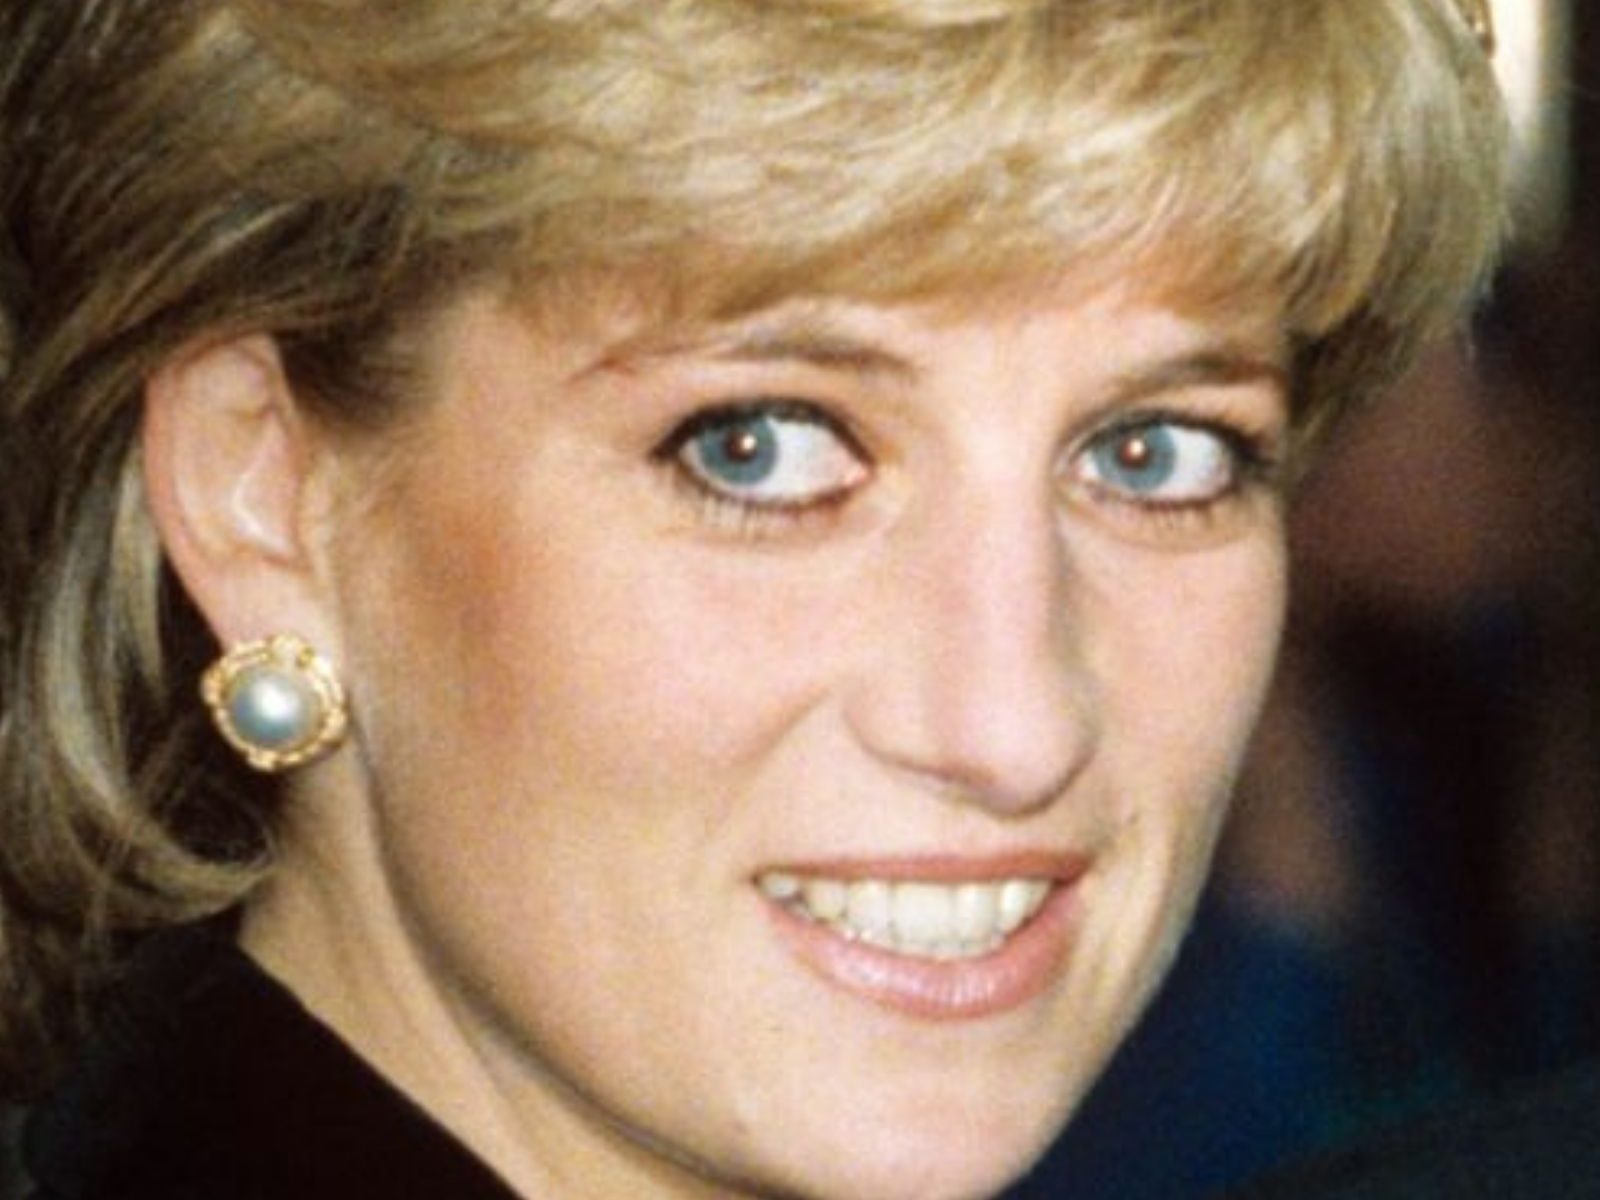 On This Day in 1997: 'People's Princess' Diana Killed in Paris Car Crash